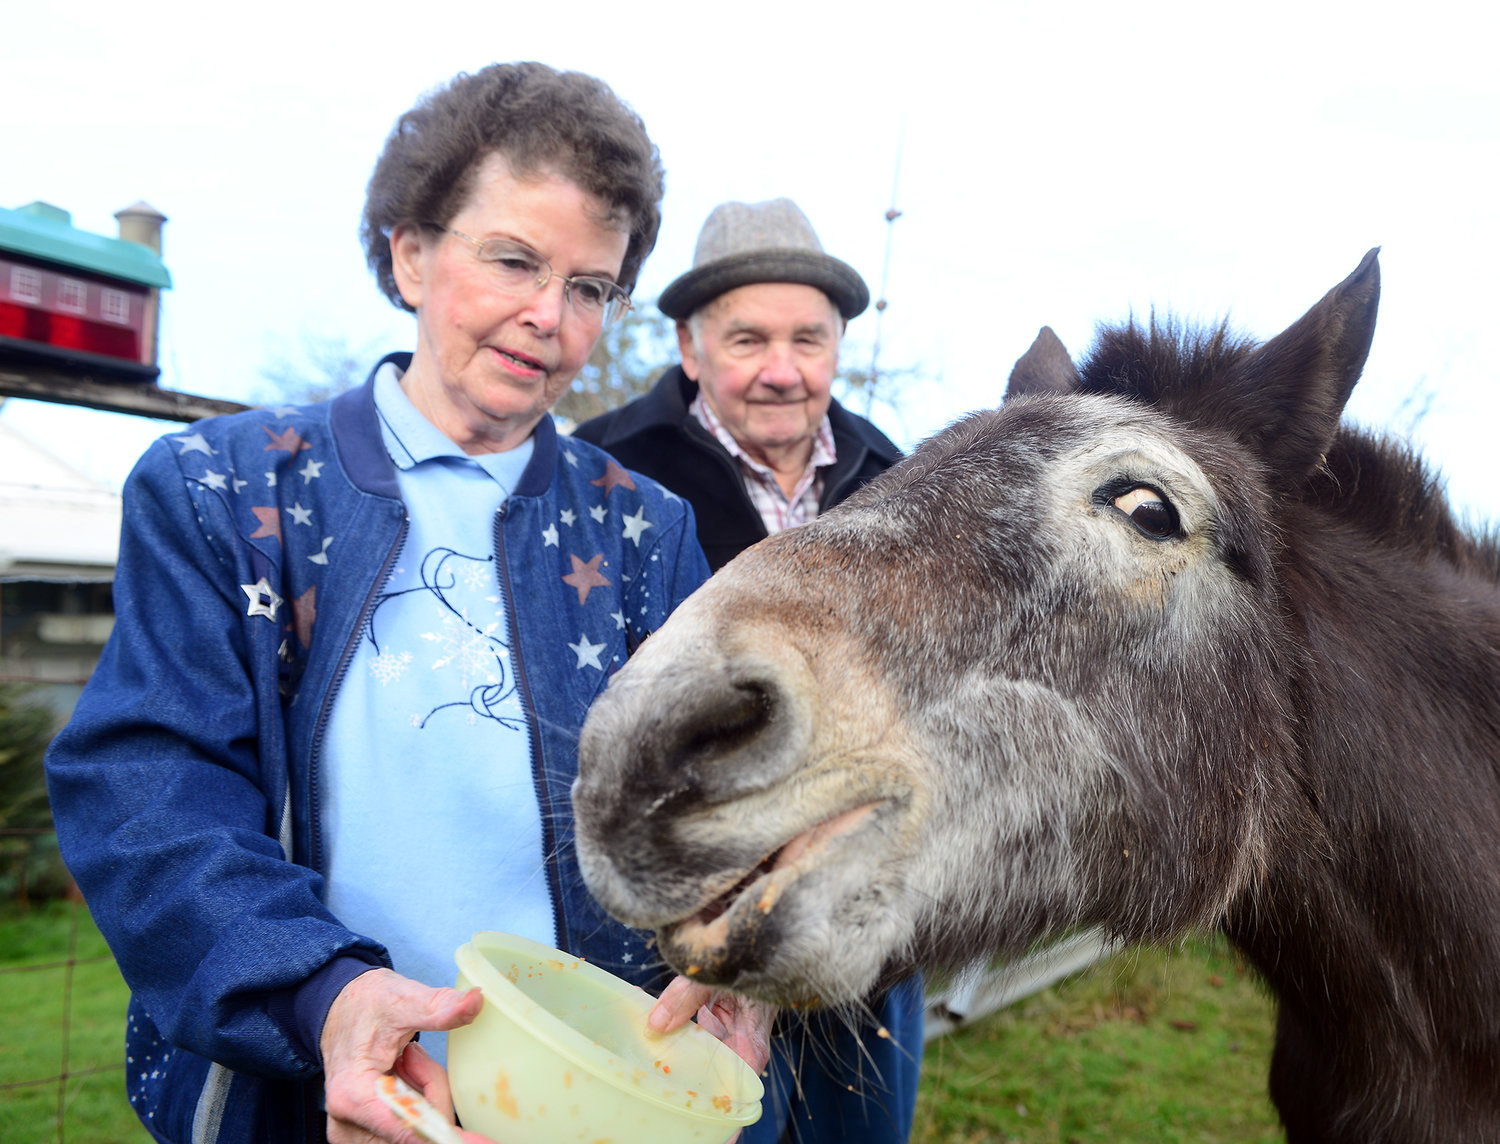 Bummy Yantis and her husband, Herb, feed their 50-year-old mule, Ted, at their home in Adna on Tuesday morning.